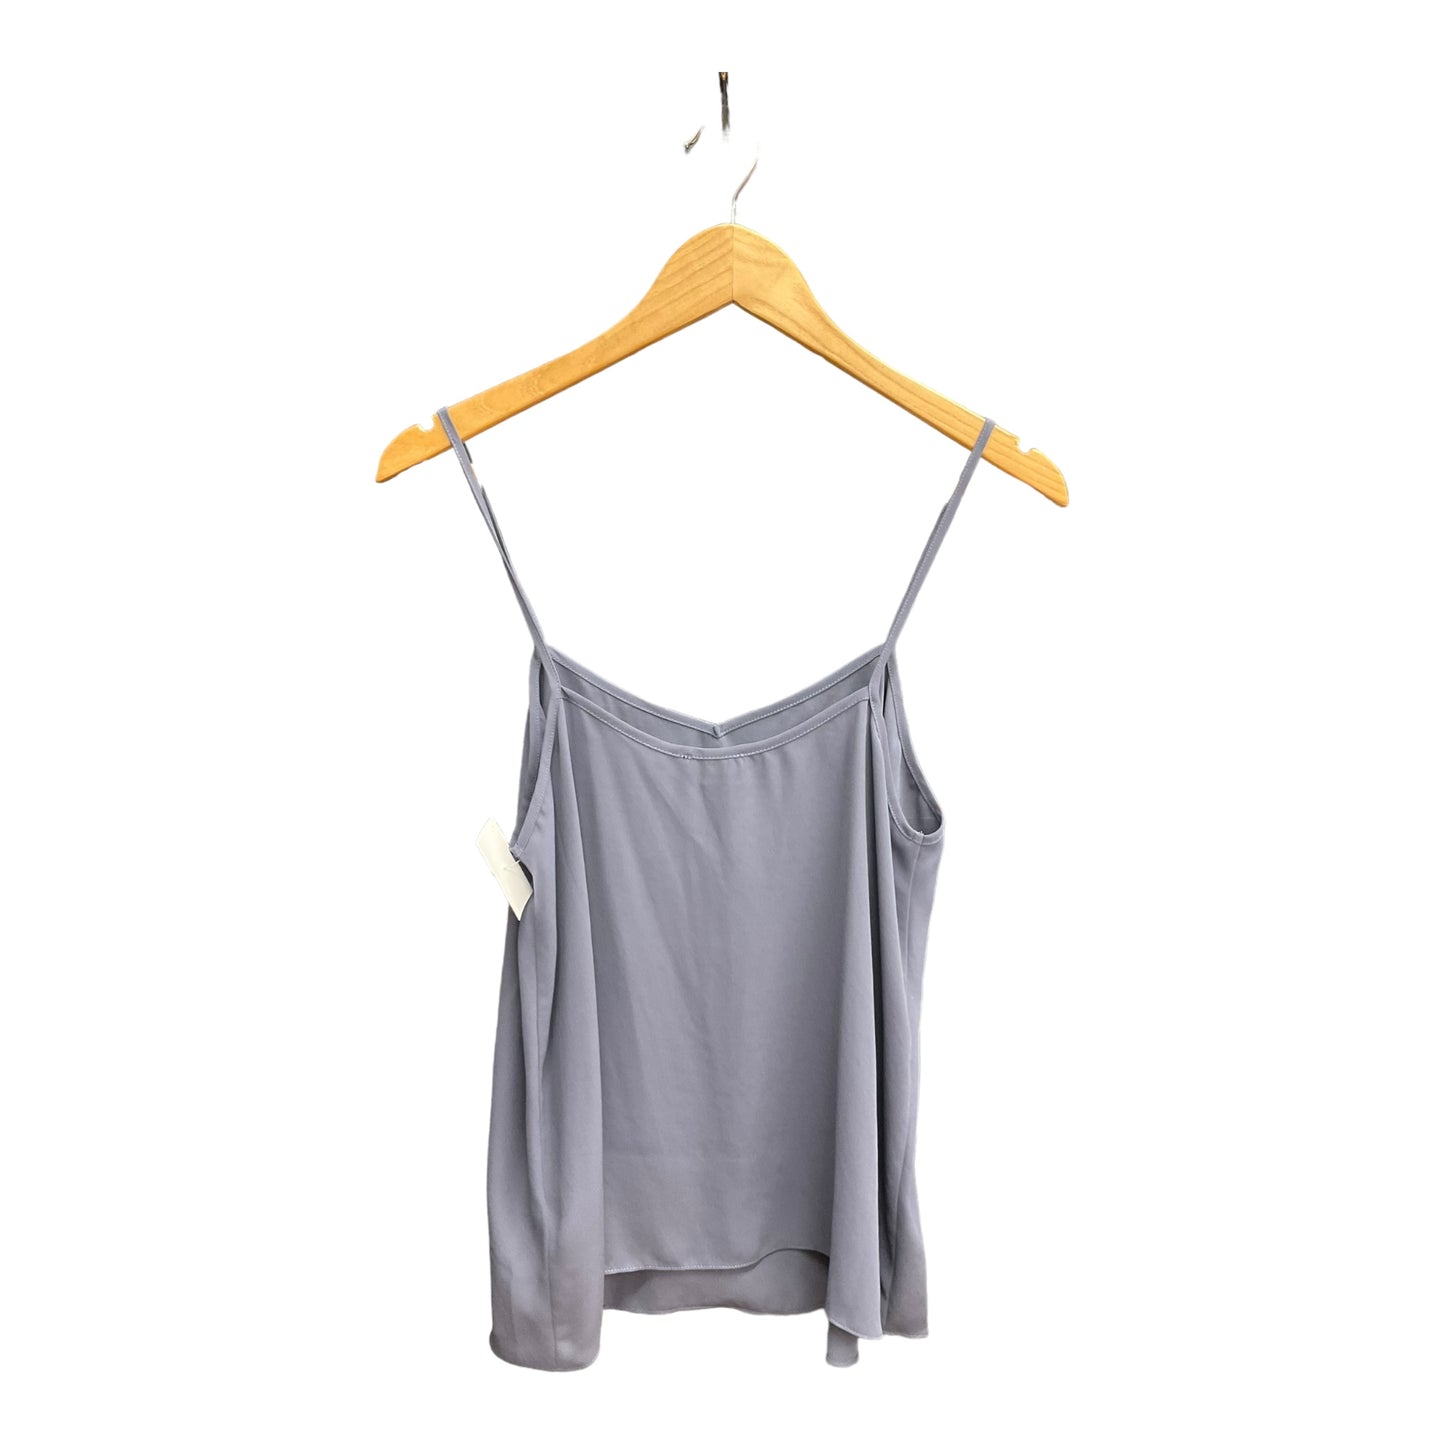 Top Sleeveless By Top Shop  Size: M